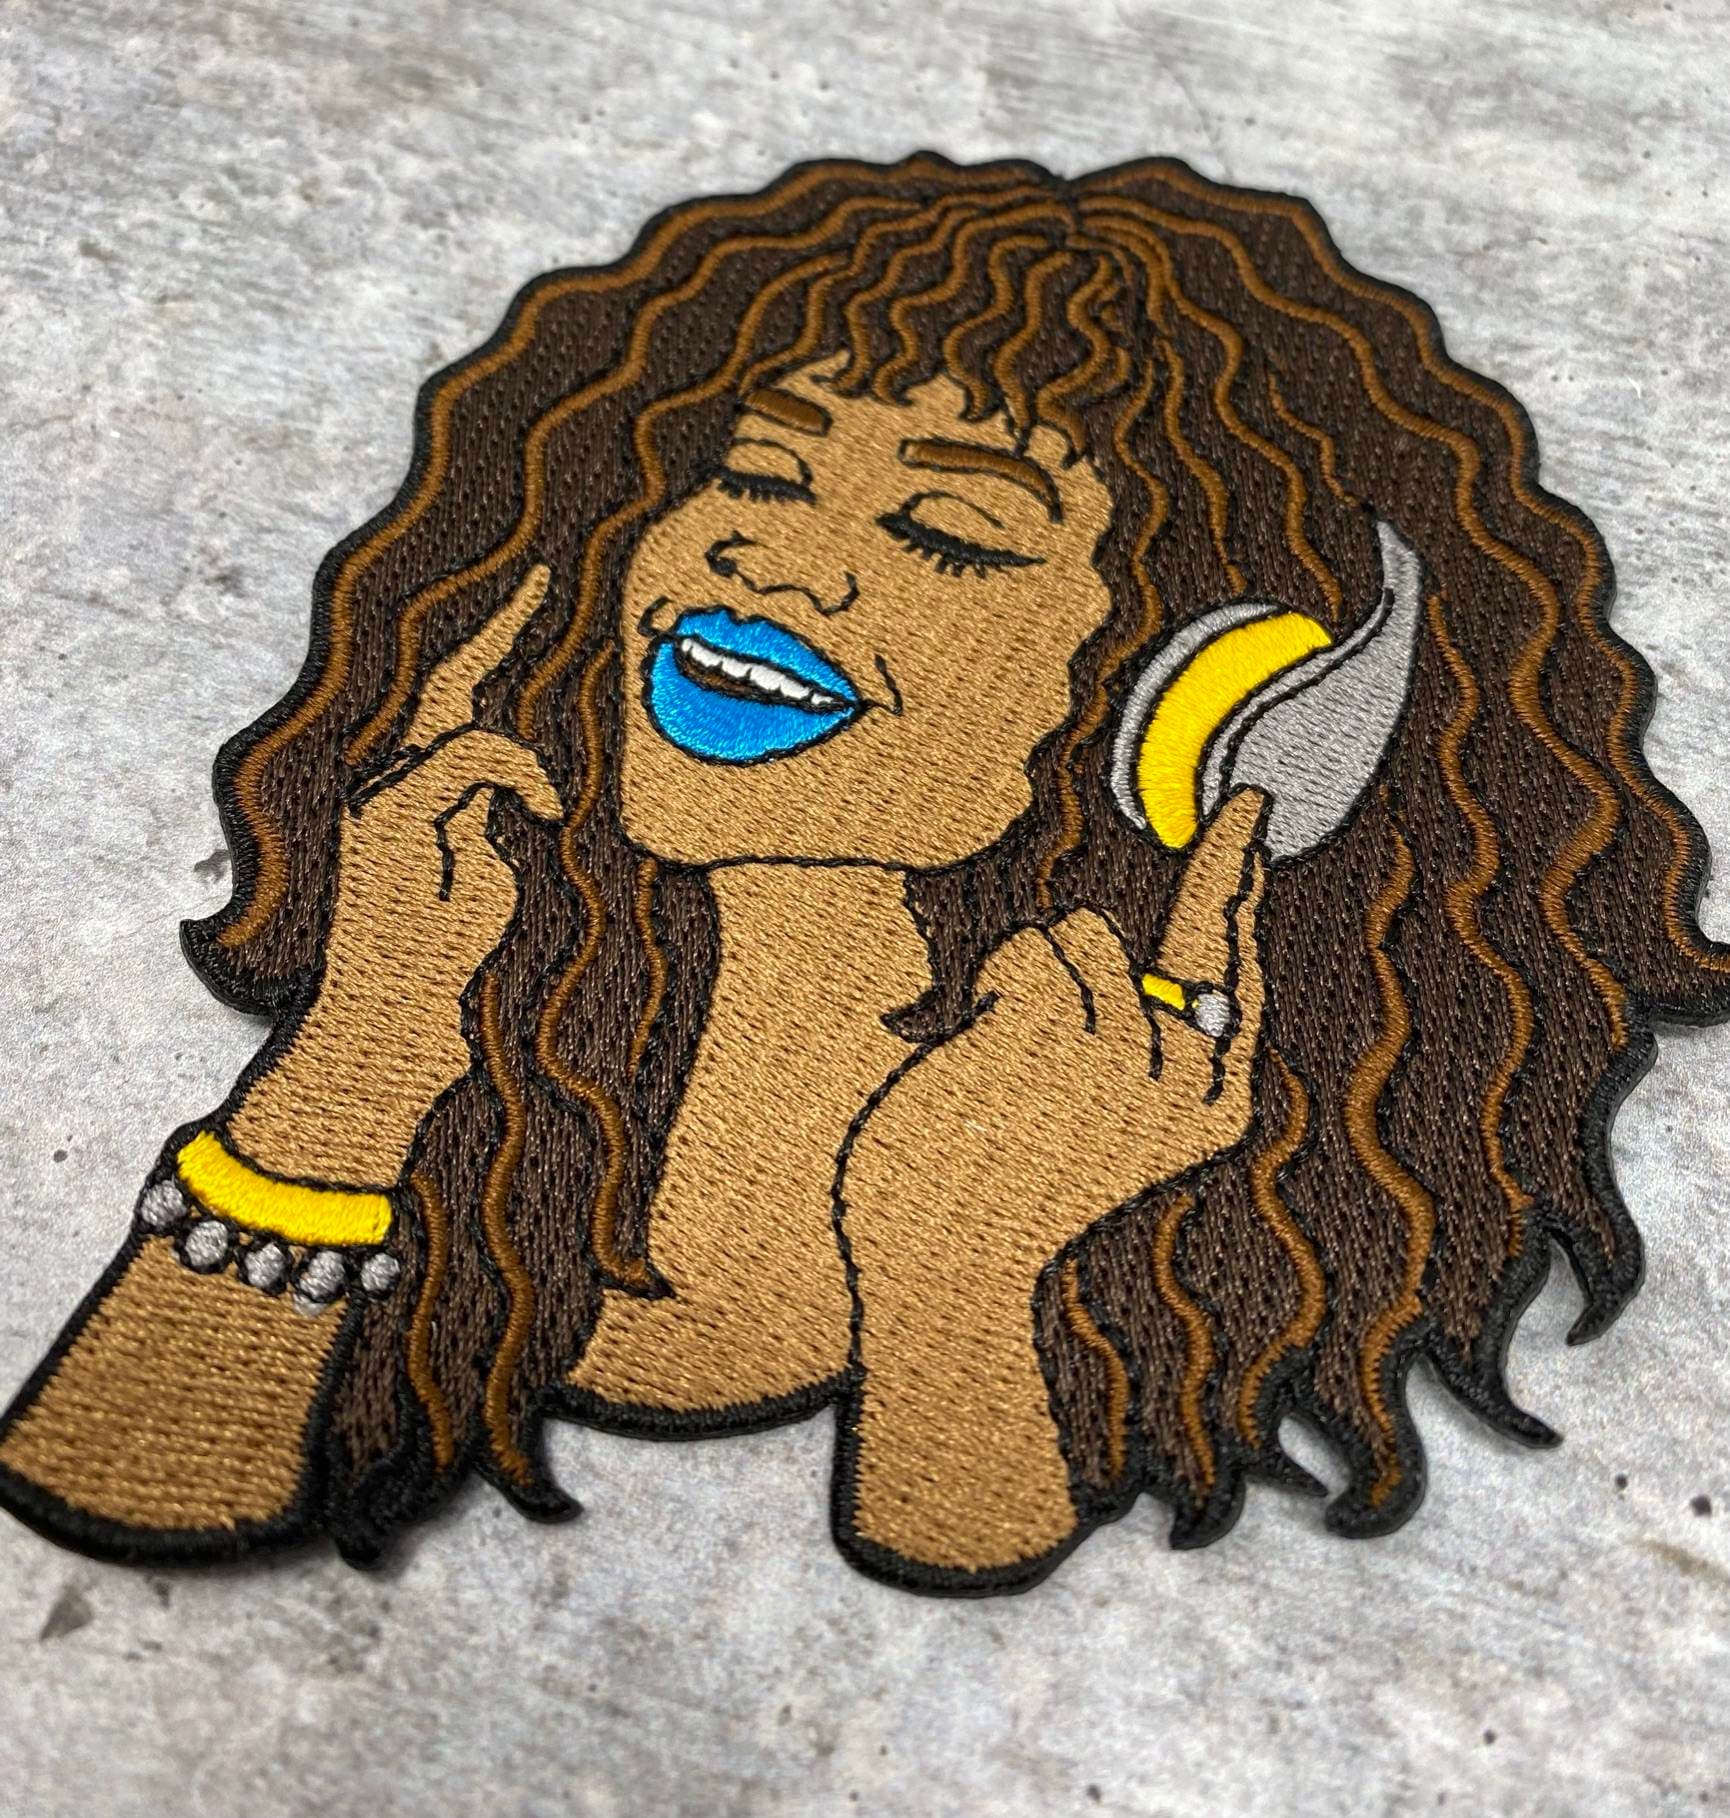 Sassy Chic "Groovin 2 Da Music" w/ Poppin Blue Lipgloss, Iron or Sew-on Embroidered Afrocentric Patch, Exclusive Appliques, Size 4.5", 1-pc